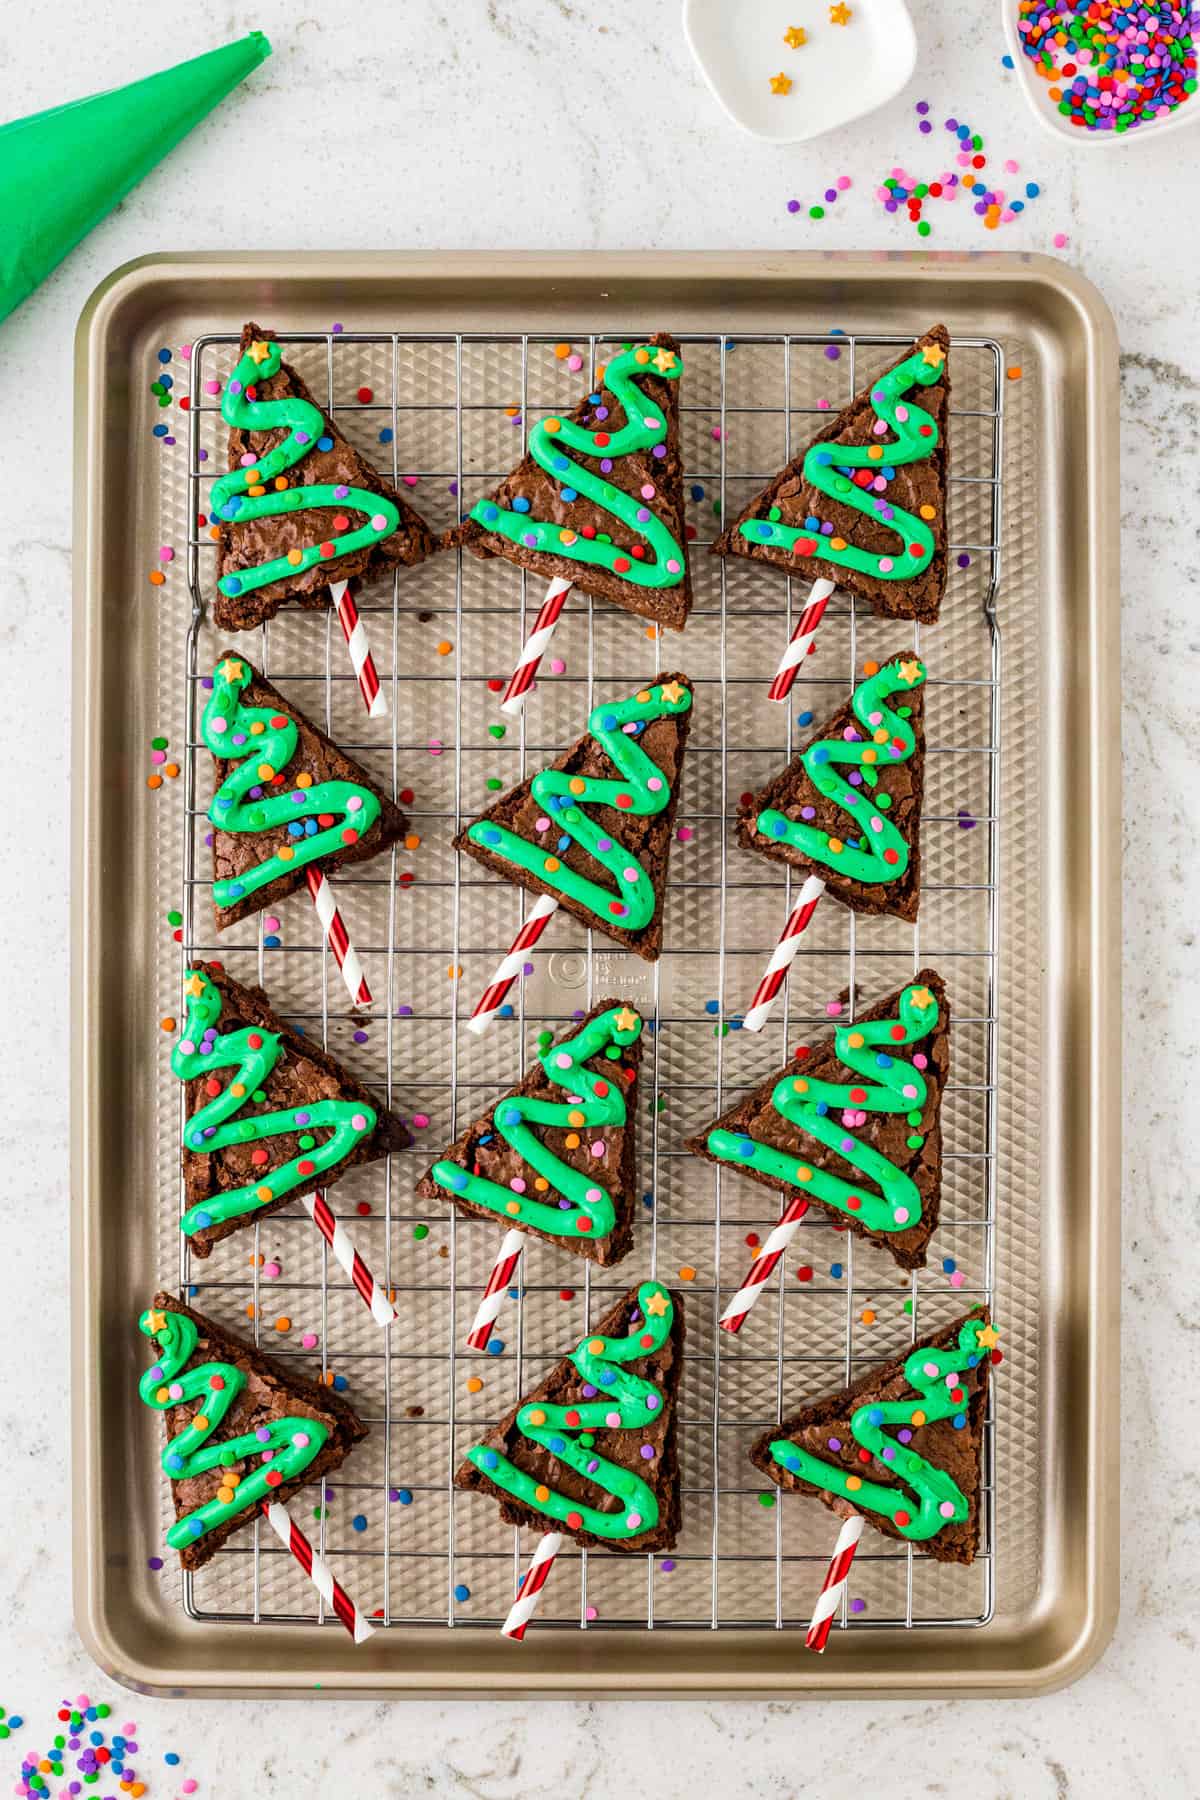 Add a 3-inch Straw to the bottom of the triangle. Place Green Icing in a Piping bag and pipe in a zig zag down the triangle and top with sprinkles.